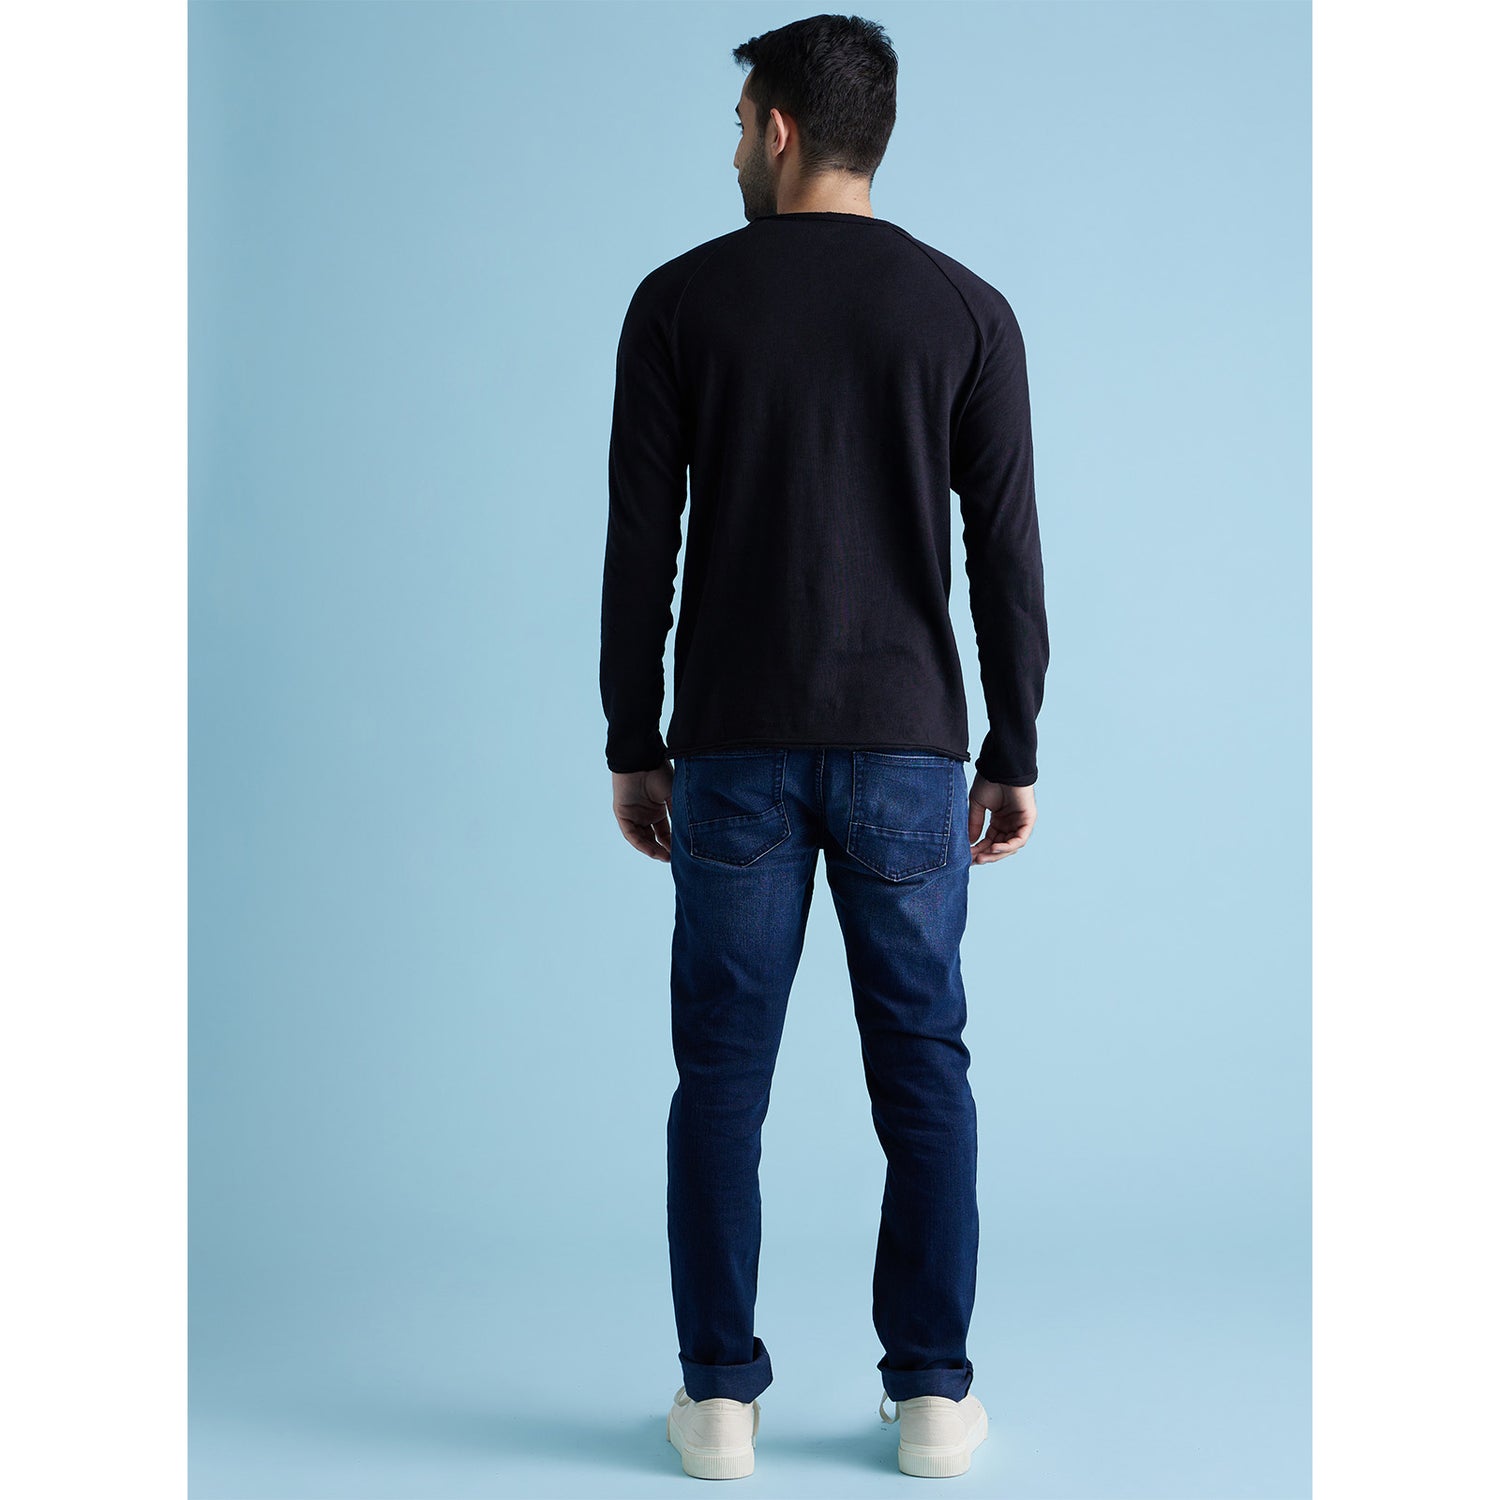 Navy Blue Regular Fit Light Fade Stretchable Cotton Jeans (DOPEACH25)